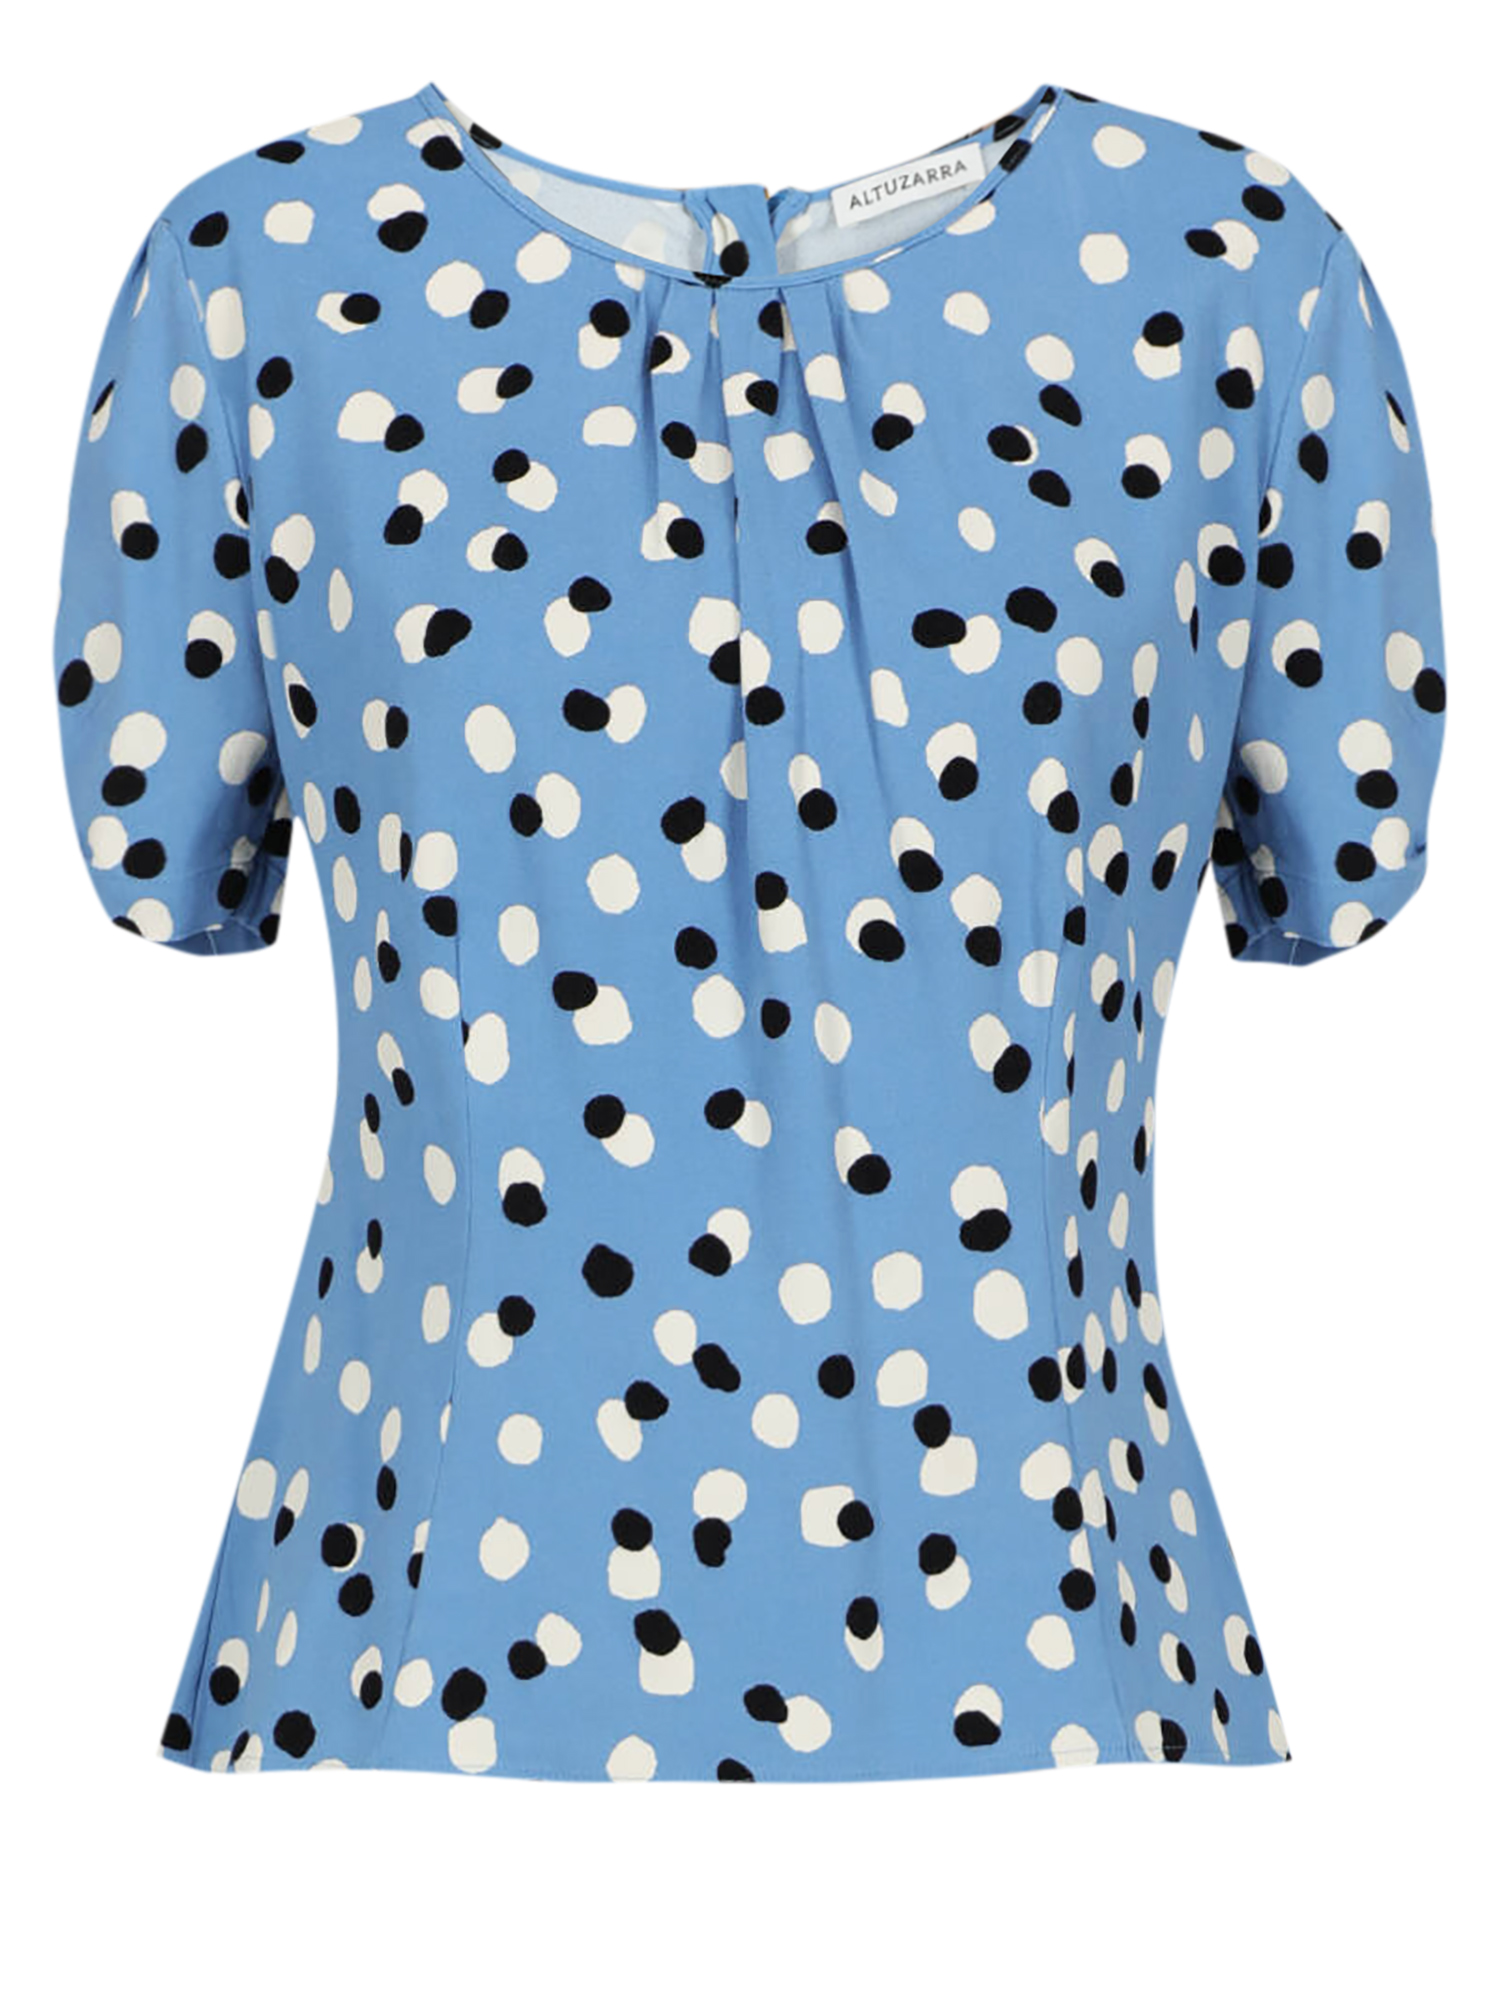 Condition: Very Good, Polka Dot Fabric, Color: Black, Blue, White - M -  -